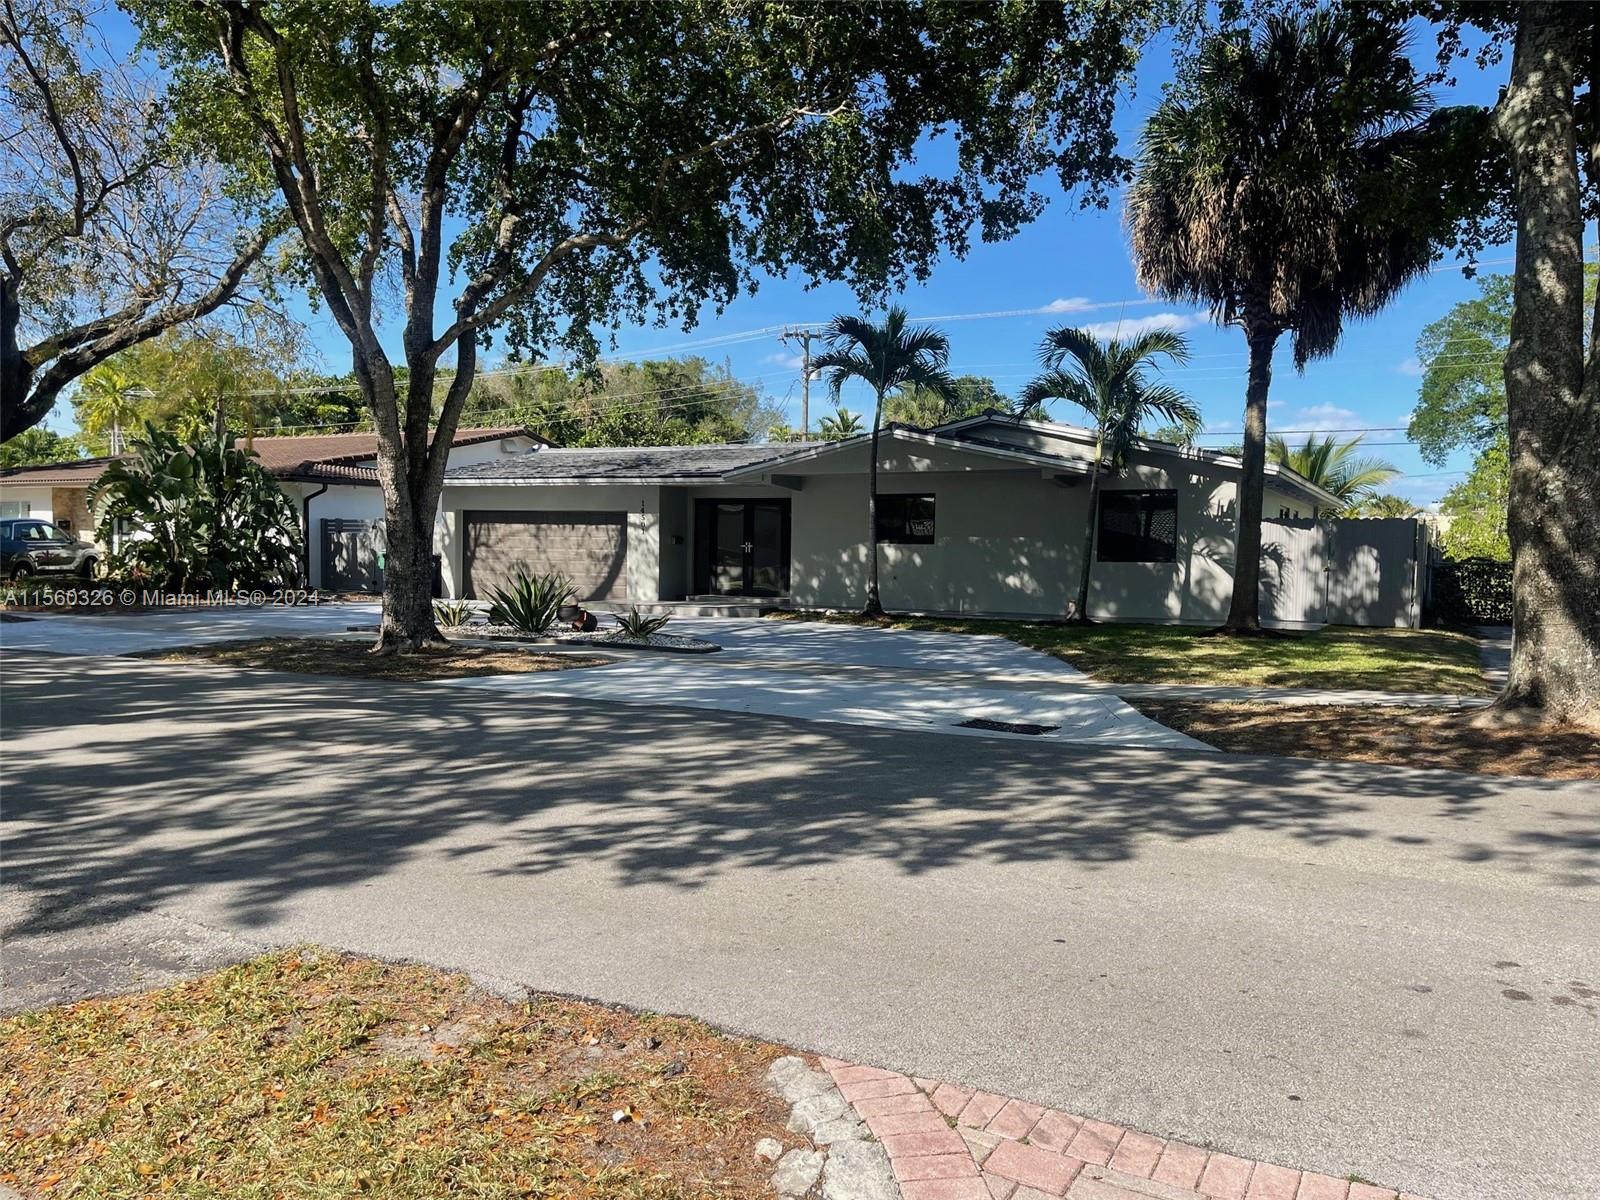 14501 Lake Candlewood Ct, Miami Lakes, Florida 33014, 3 Bedrooms Bedrooms, ,2 BathroomsBathrooms,Residential,For Sale,14501 Lake Candlewood Ct,A11560326